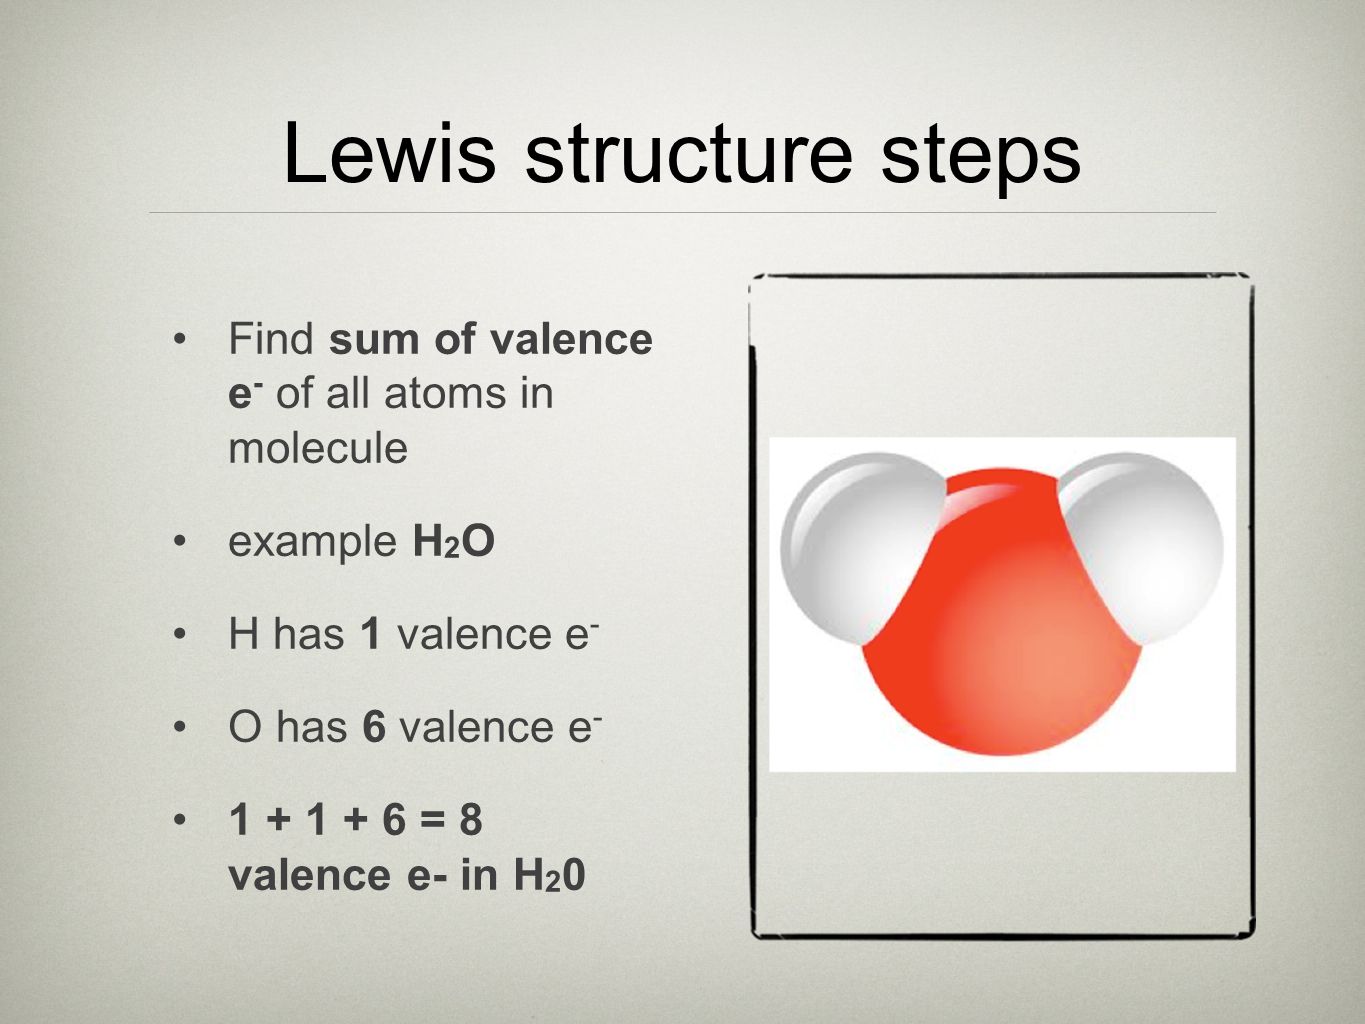 Lewis structure steps Find sum of valence e - of all atoms in molecule example H 2 O H has 1 valence e - O has 6 valence e = 8 valence e- in H 2 0